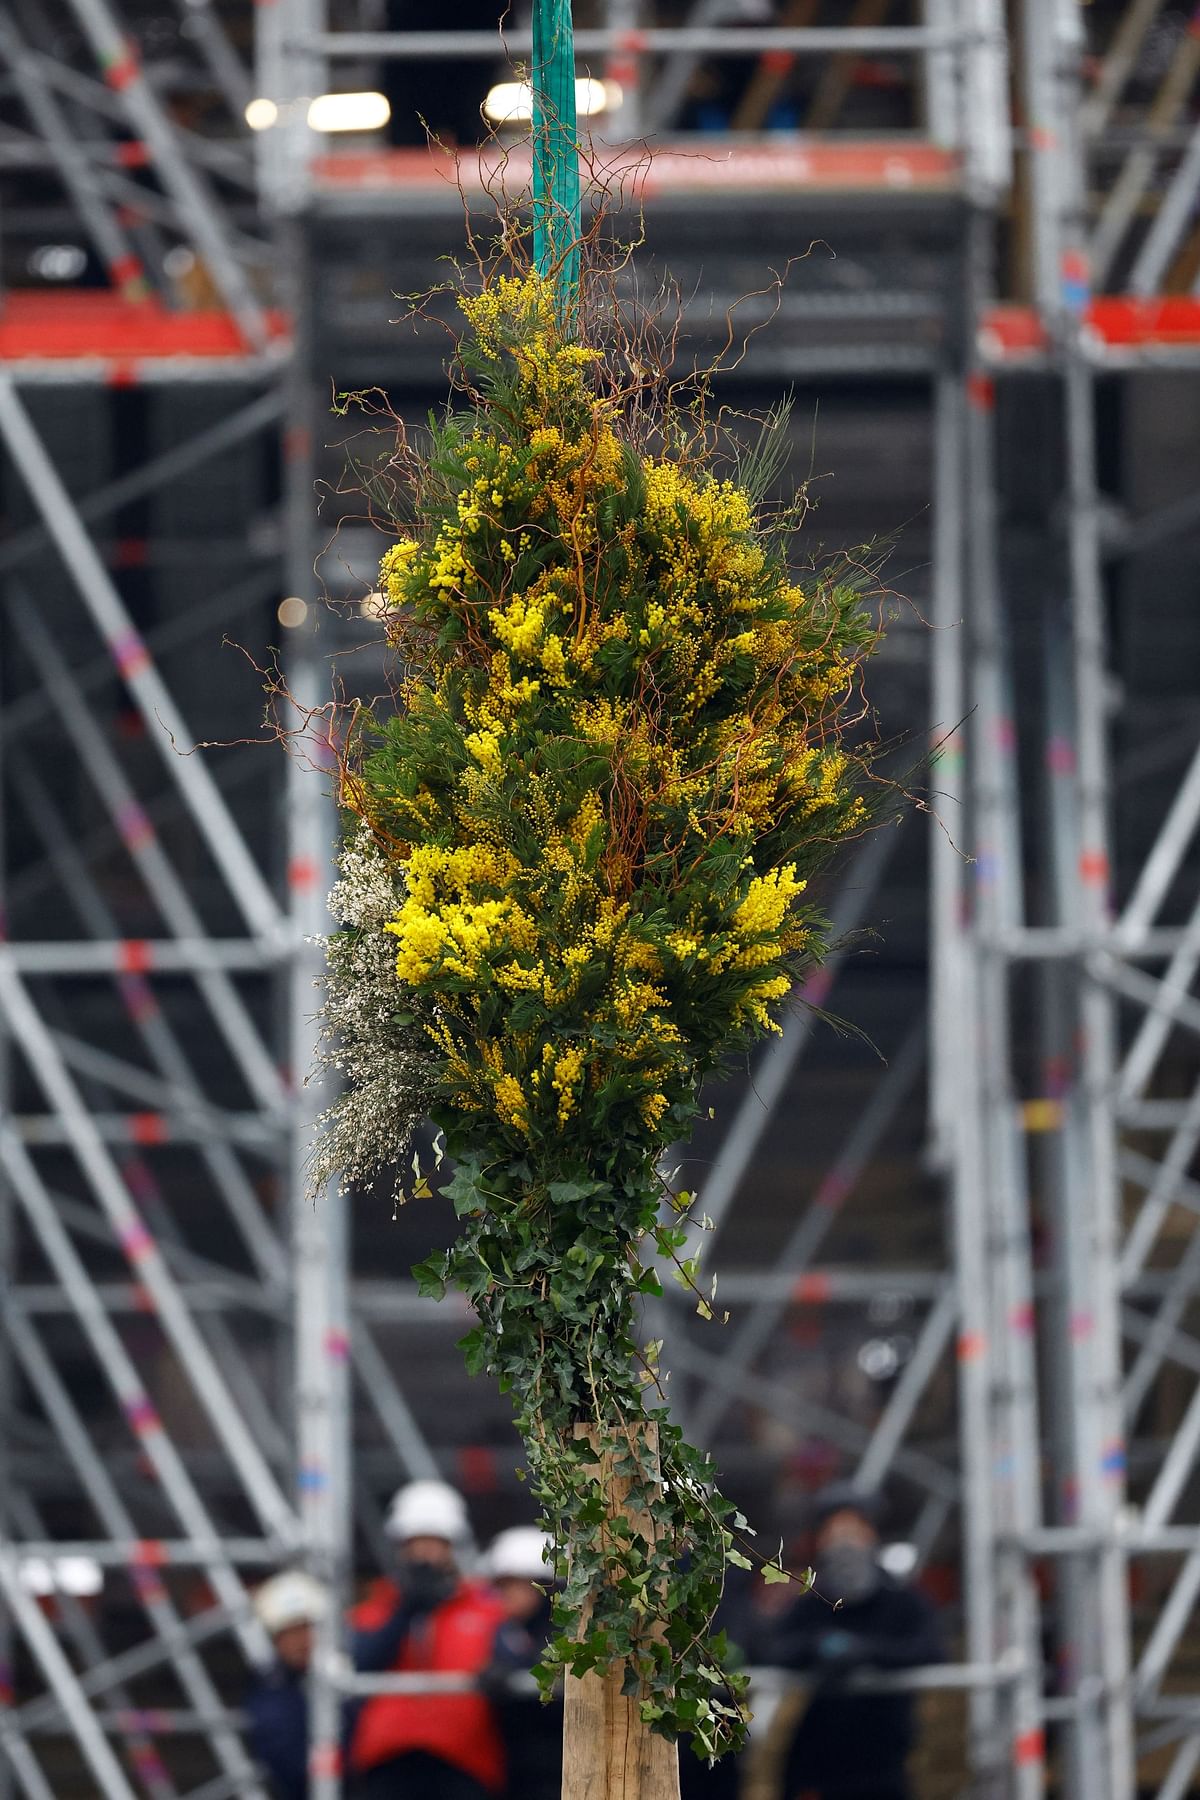 View of the traditionnal bouquet of flowers to celebrate the end of the reconstruction of the medieval choir framework of the Notre-Dame de Paris Cathedral, which was ravaged by a fire in 2019 that sent its spire crumbling down, as restoration works continue before its re-opening, in Paris, France, January 12, 2024. REUTERS/Sarah Meyssonnier